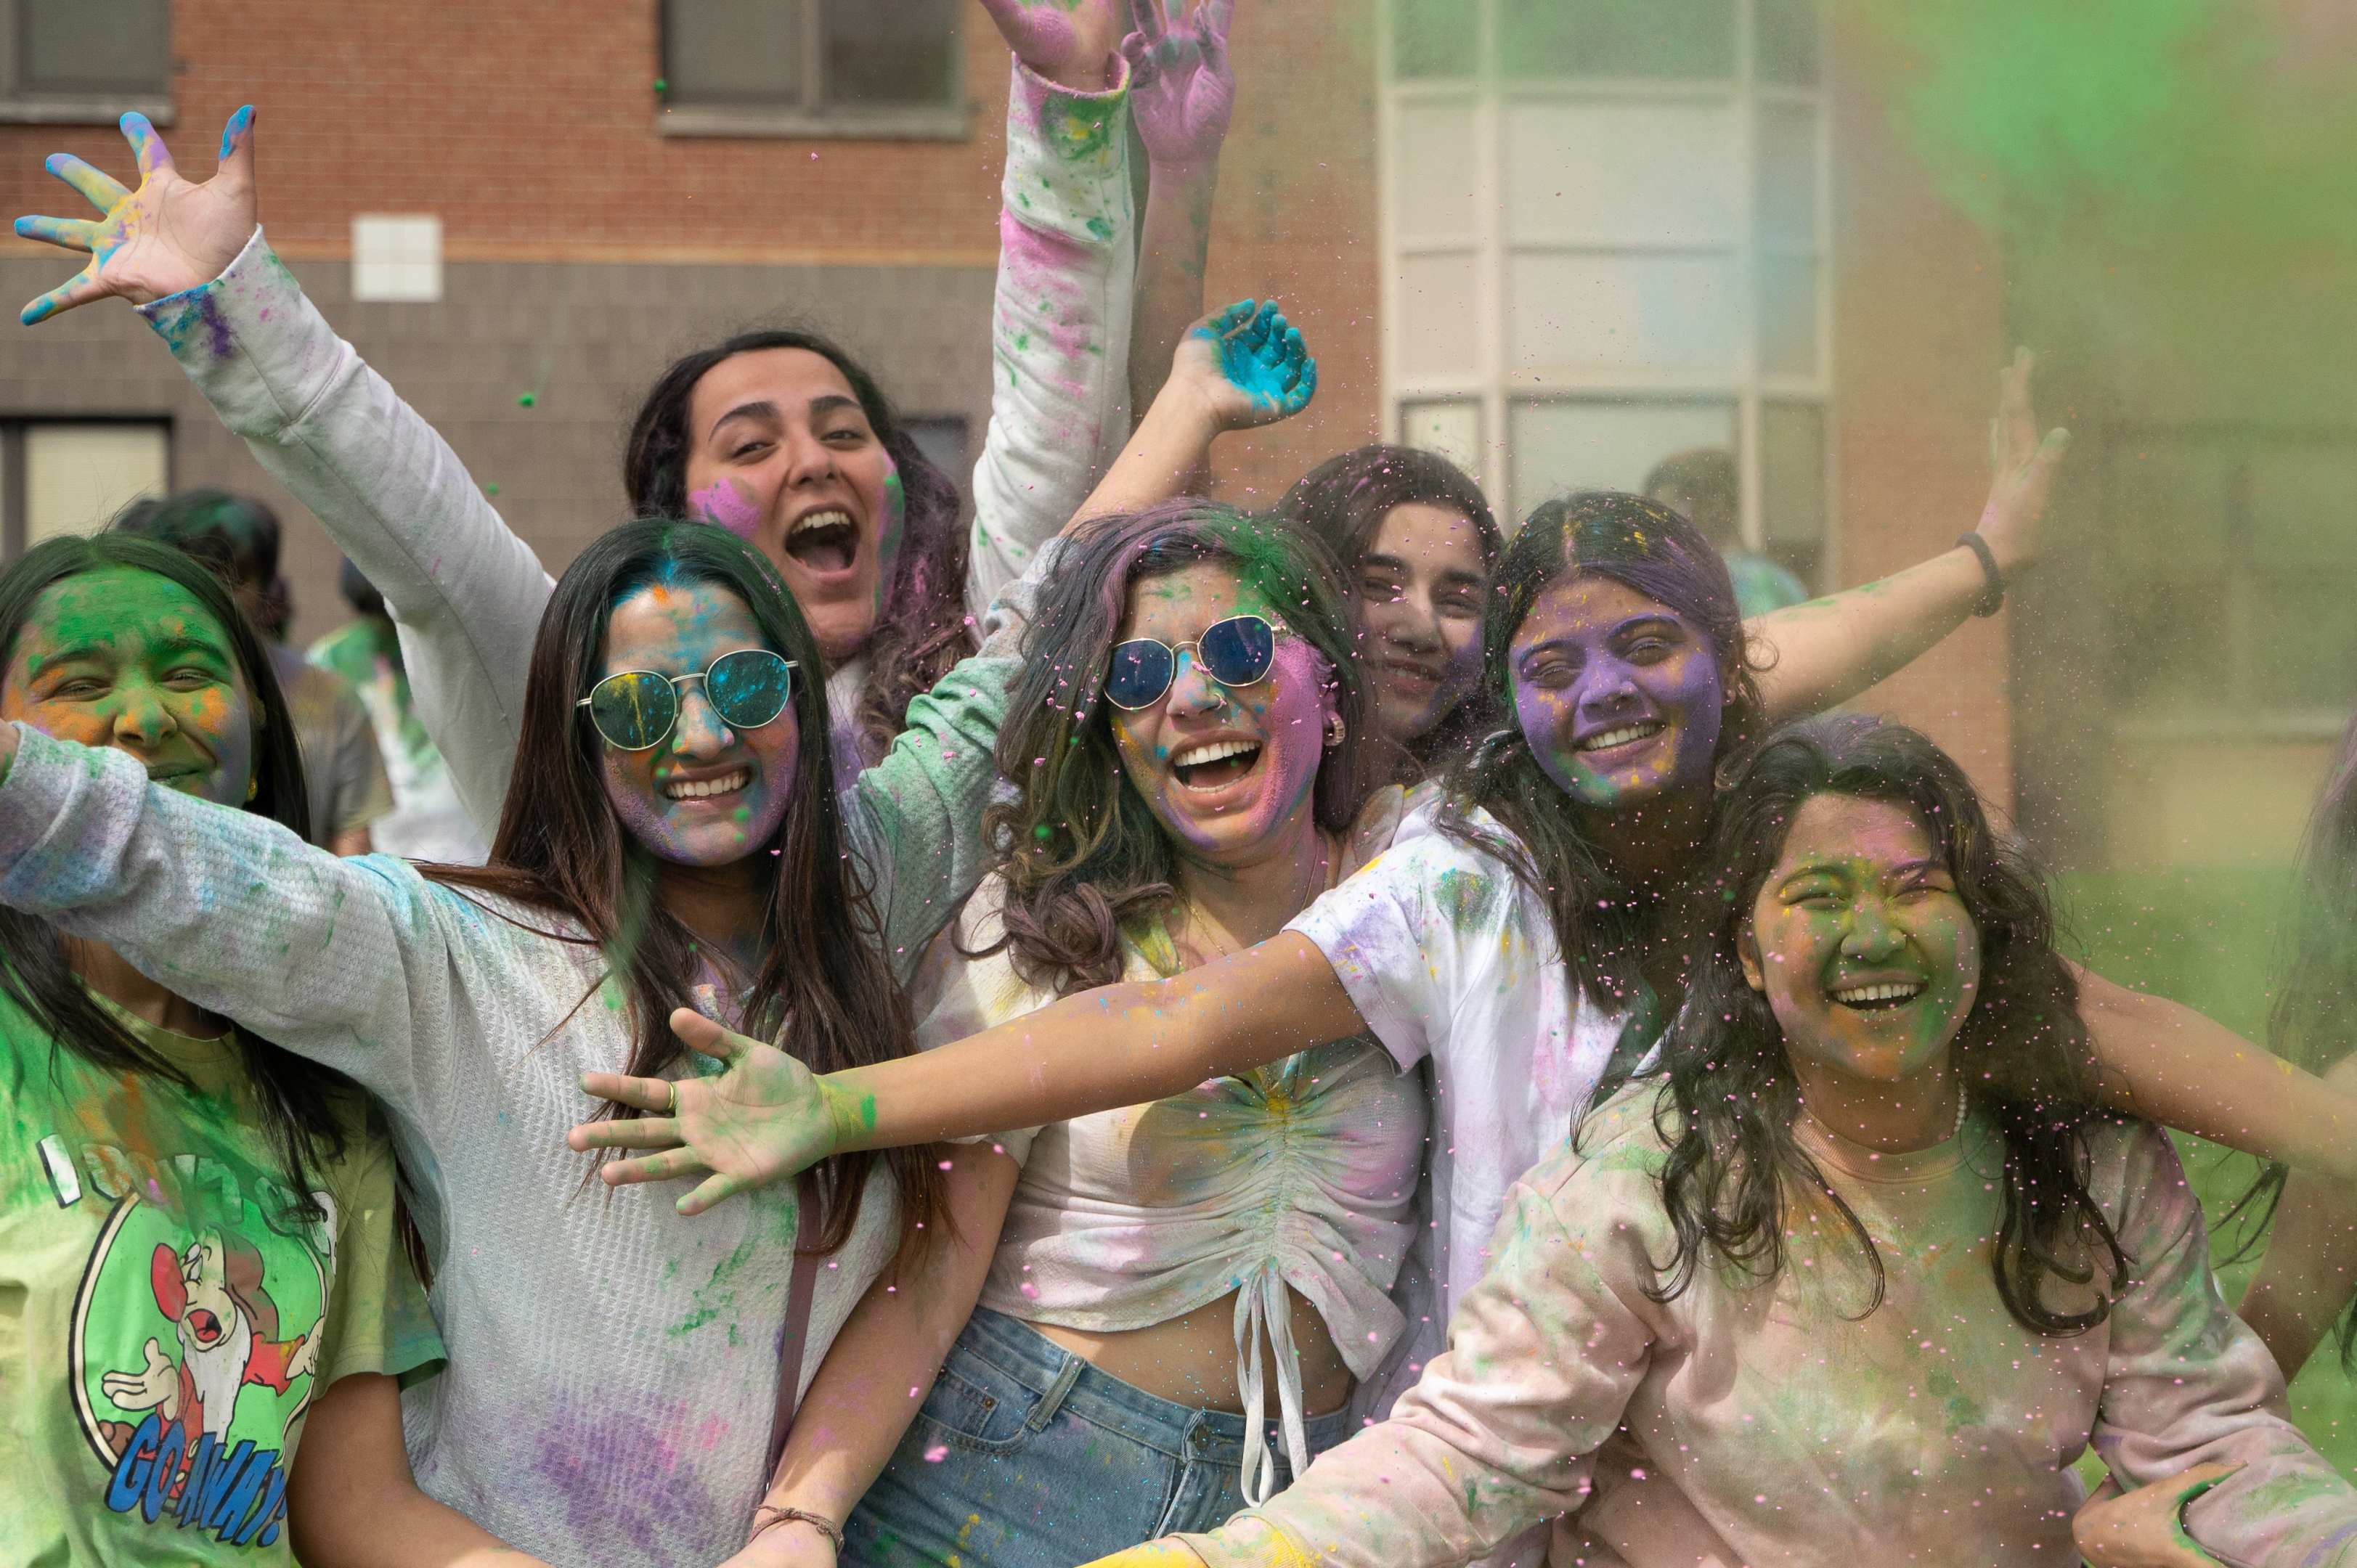 Students celebrating the Hindu holiday, Holi, the Festival of Colors.